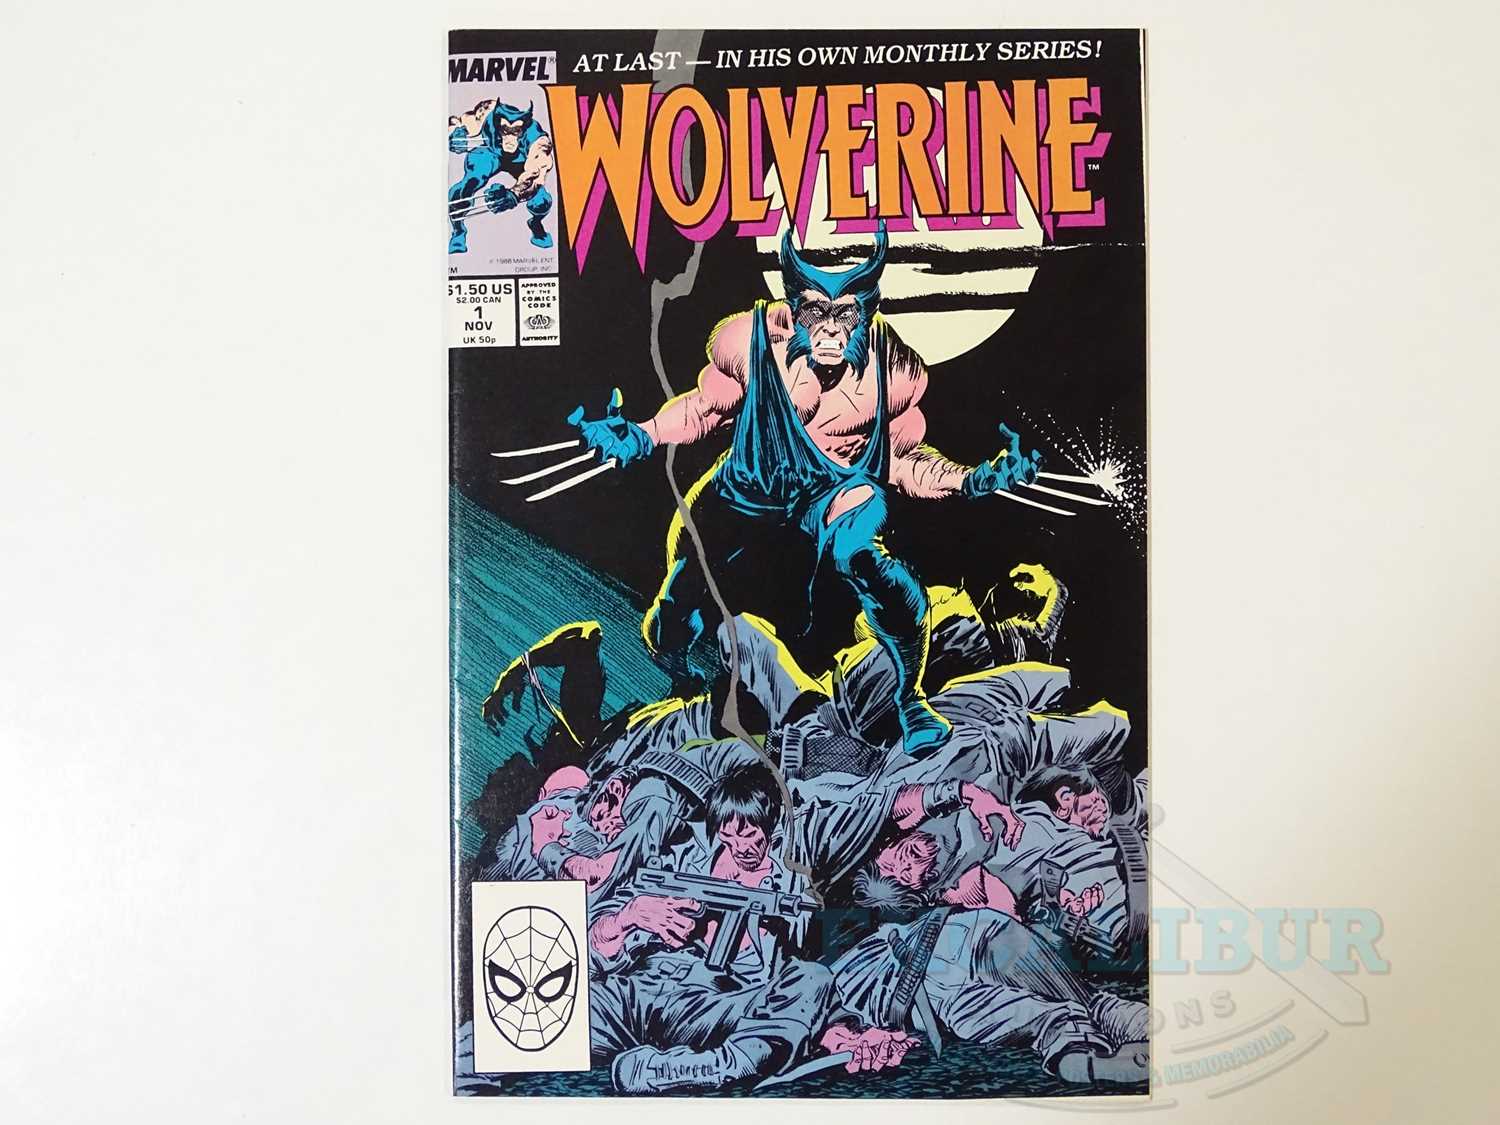 WOLVERINE #1 - (1988 - MARVEL) - First appearance of Wolverine (as "Patch" ) in an ongoing solo